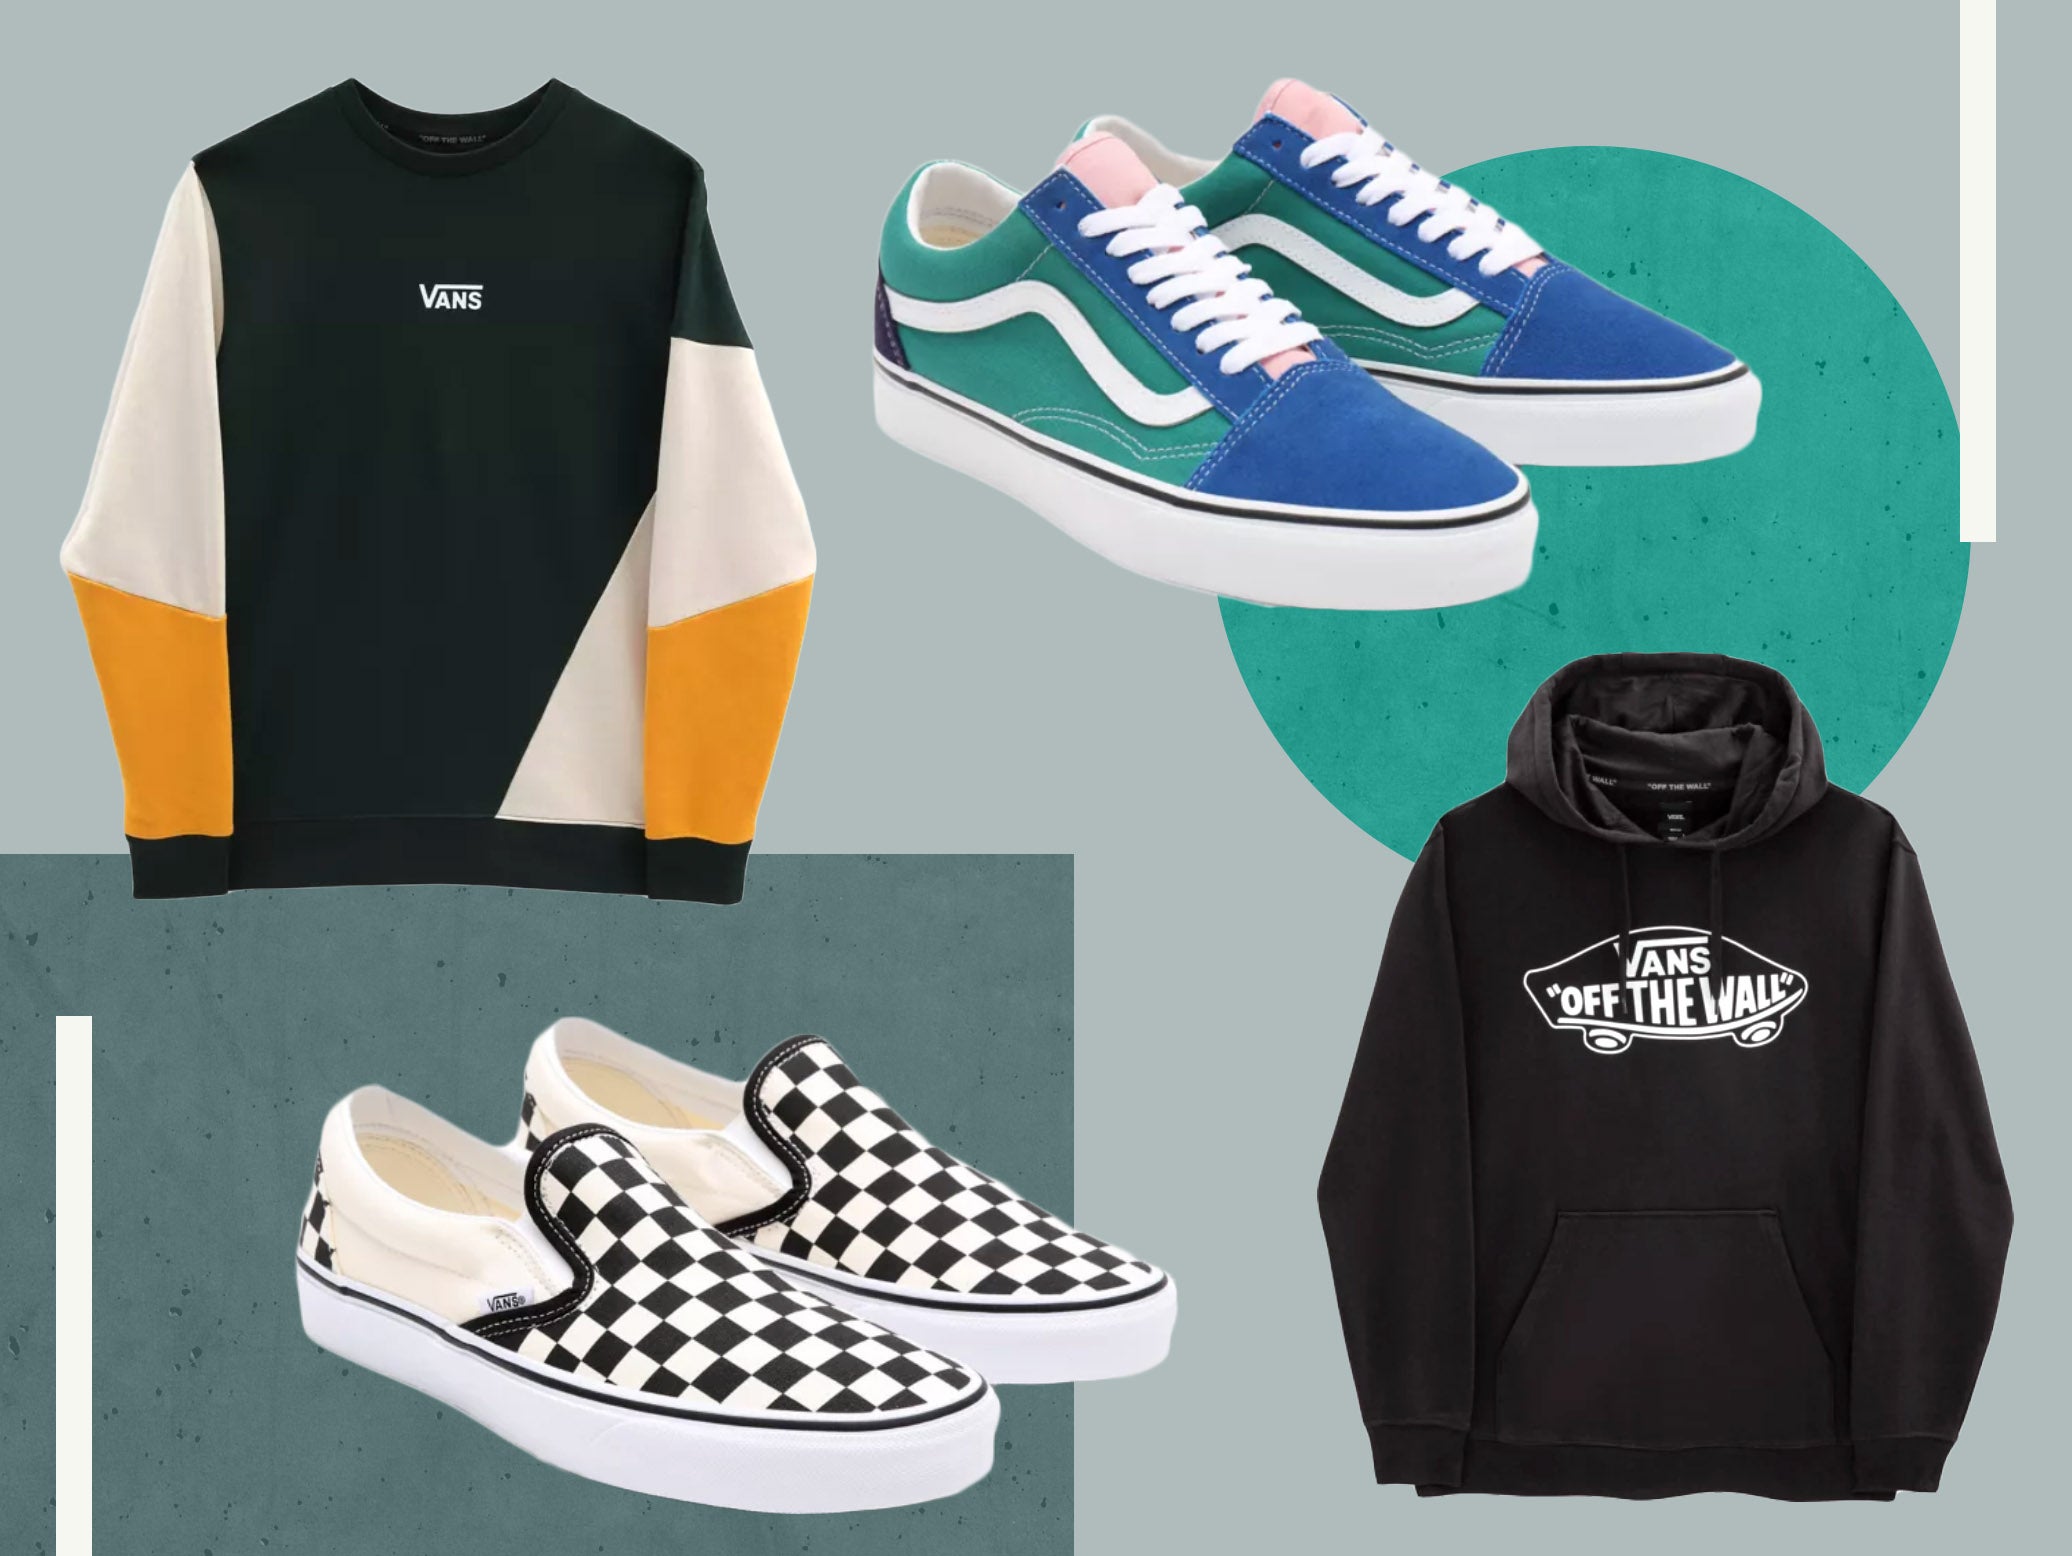 Vans Black Friday sale: 50% off slip-ons, bags and clothing | The ... ايفانا